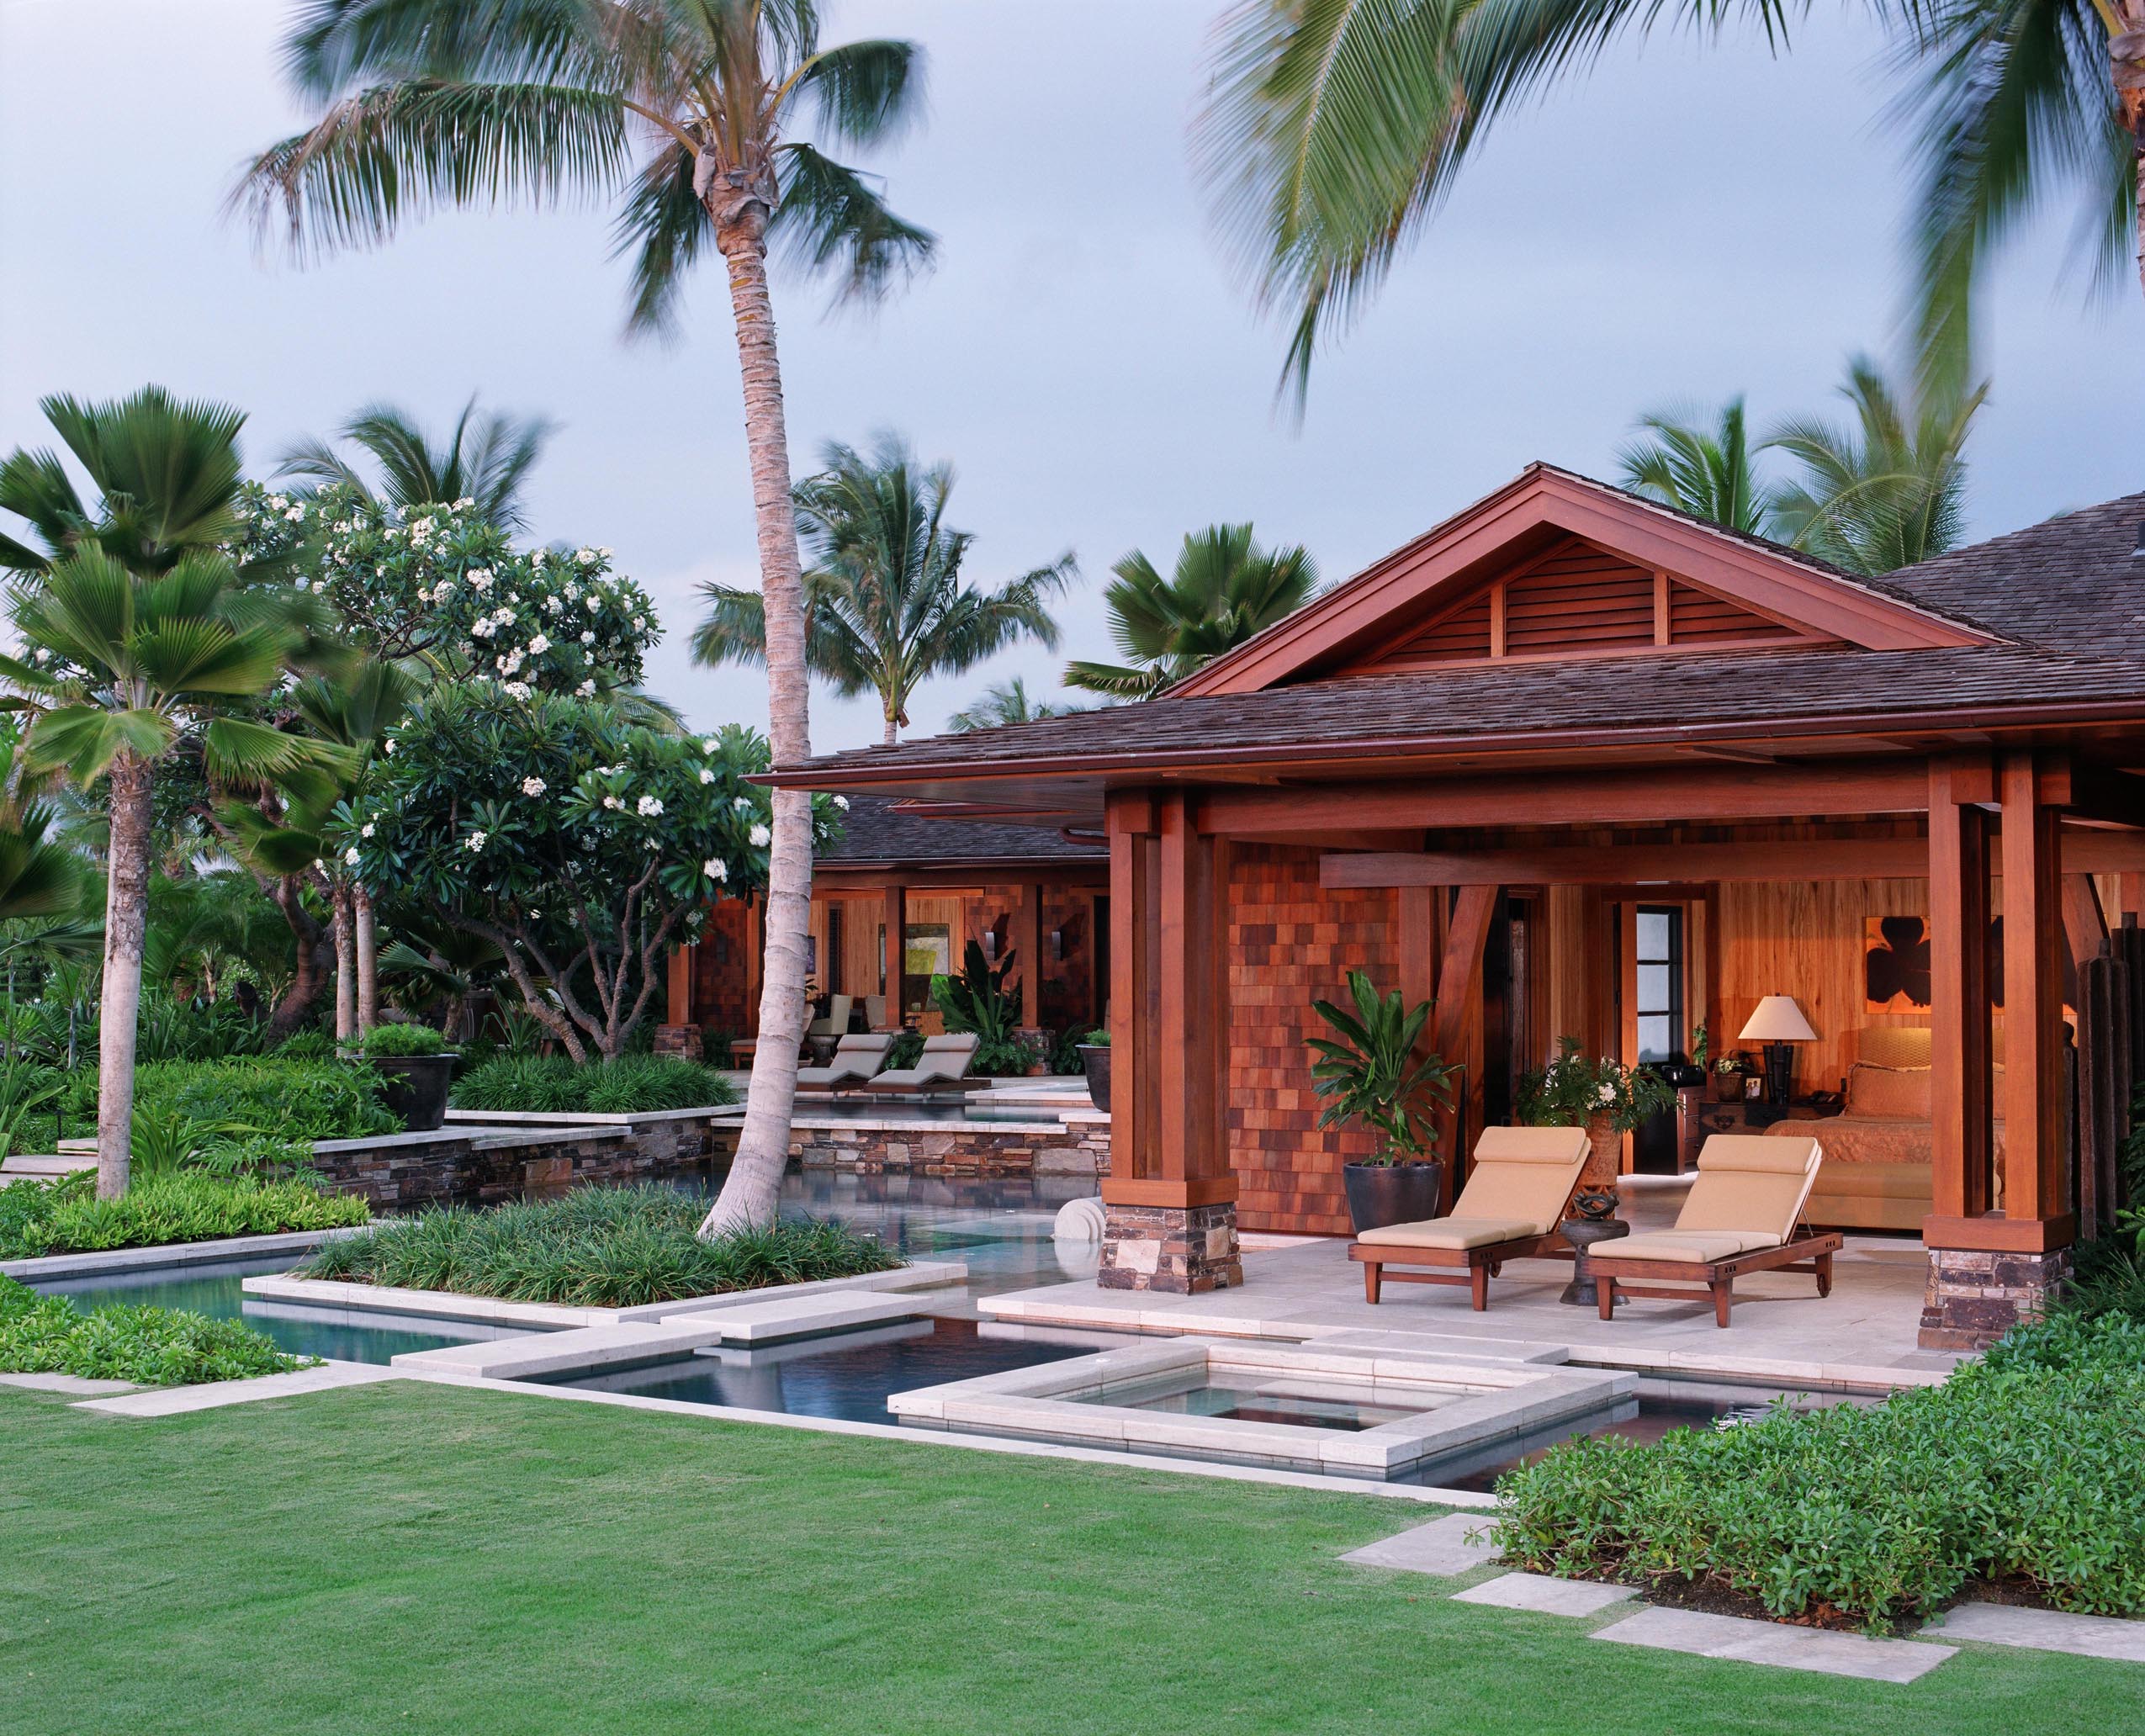 Cocotraie Magazine features Tropical Craftsman Home